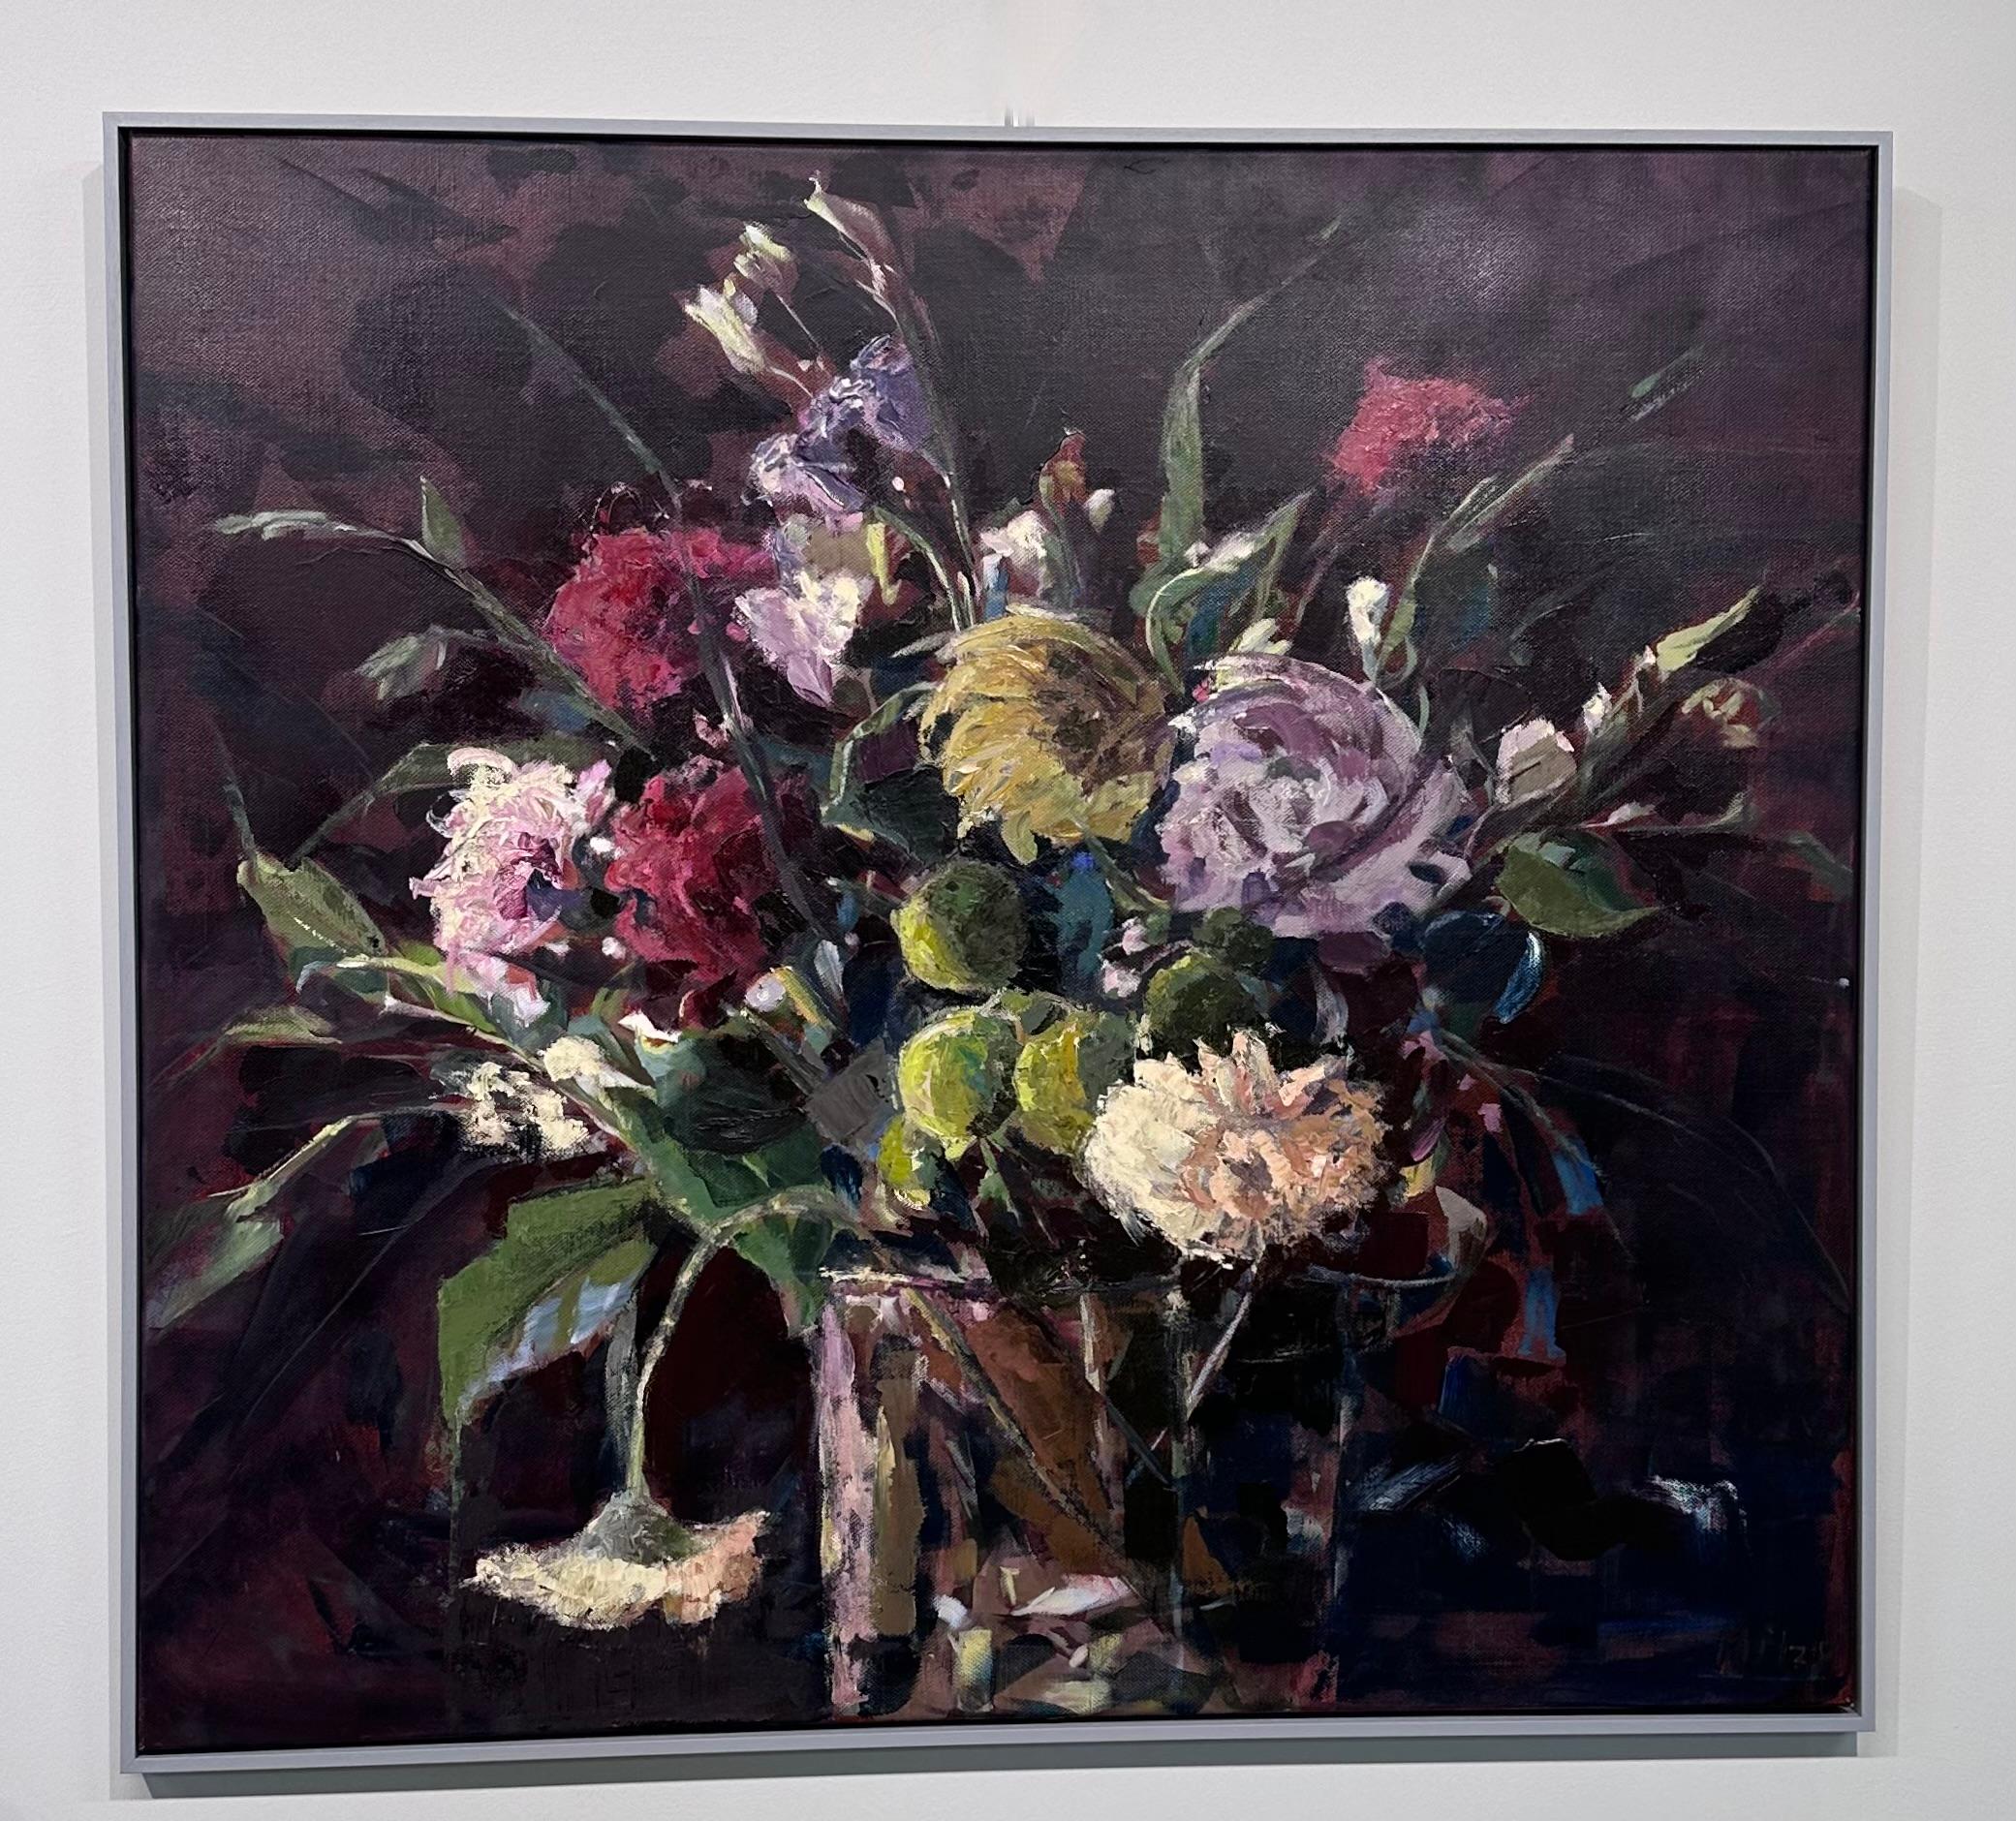 Mitzy Renooy
Wild Flowers
110 x 120 cm
Frame included in price, size with frame: 115 x 125 cm

Dutch artist Mitzy Renooy, a former camera woman for national television, did follow art academy to learn to paint in an own style. Her education was a